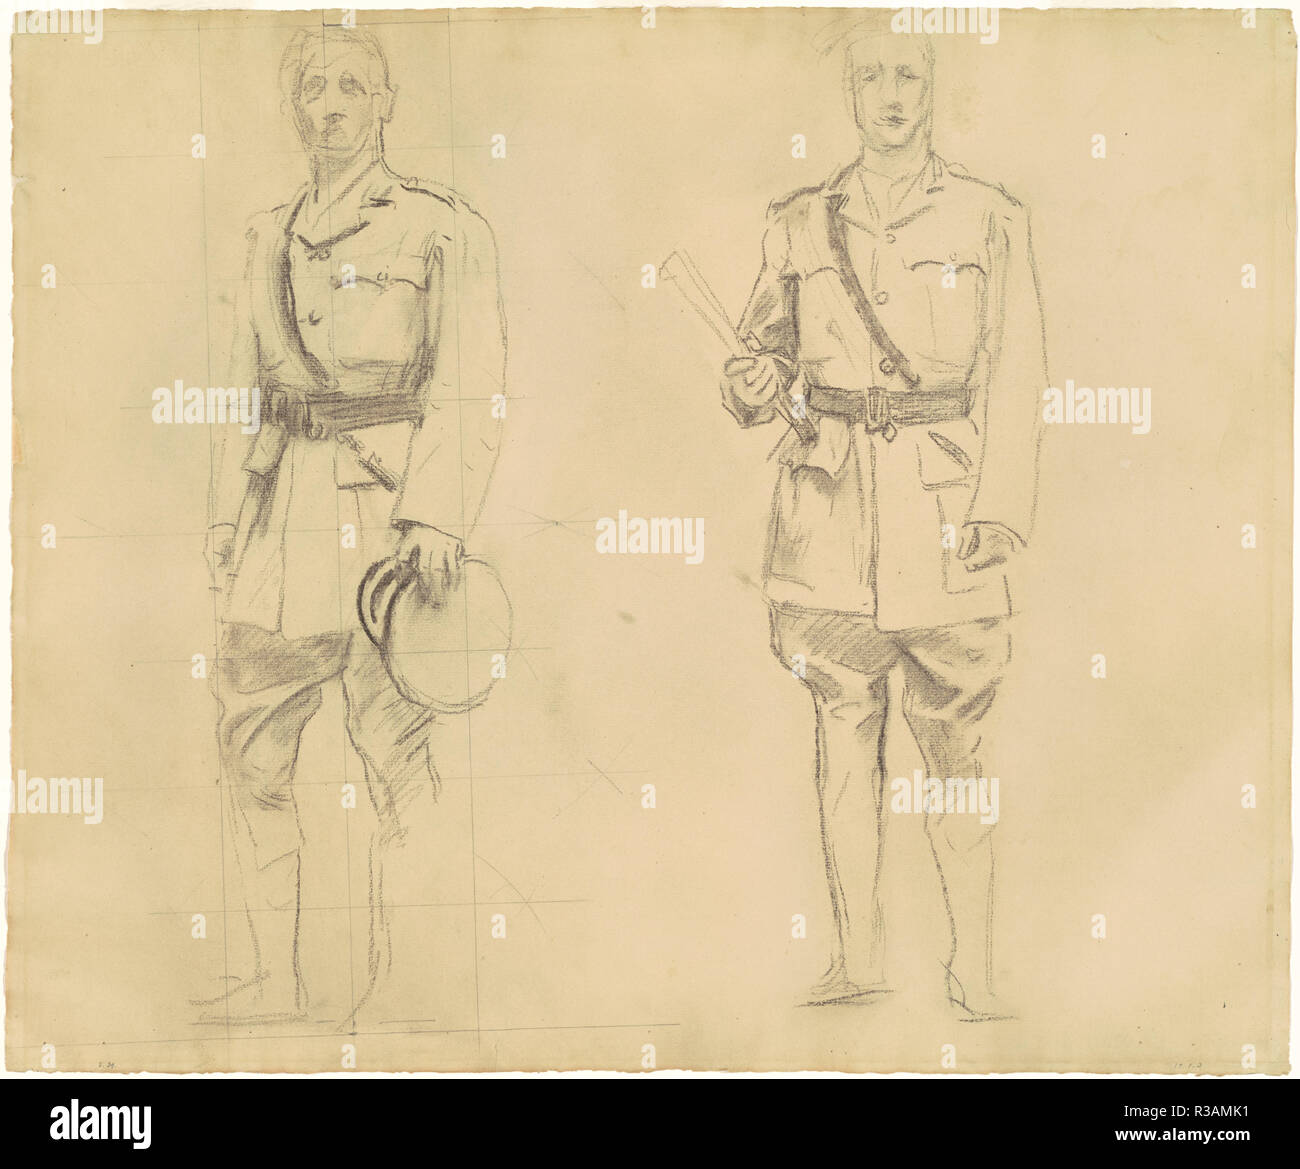 Studies of Generals Plumer and Haig for 'General Officers of World War I' [recto]. Dated: 1920-1922. Dimensions: sheet: 47.94 × 57.79 cm (18 7/8 × 22 3/4 in.). Medium: charcoal with graphite on laid paper. Museum: National Gallery of Art, Washington DC. Author: John Singer Sargent. Stock Photo